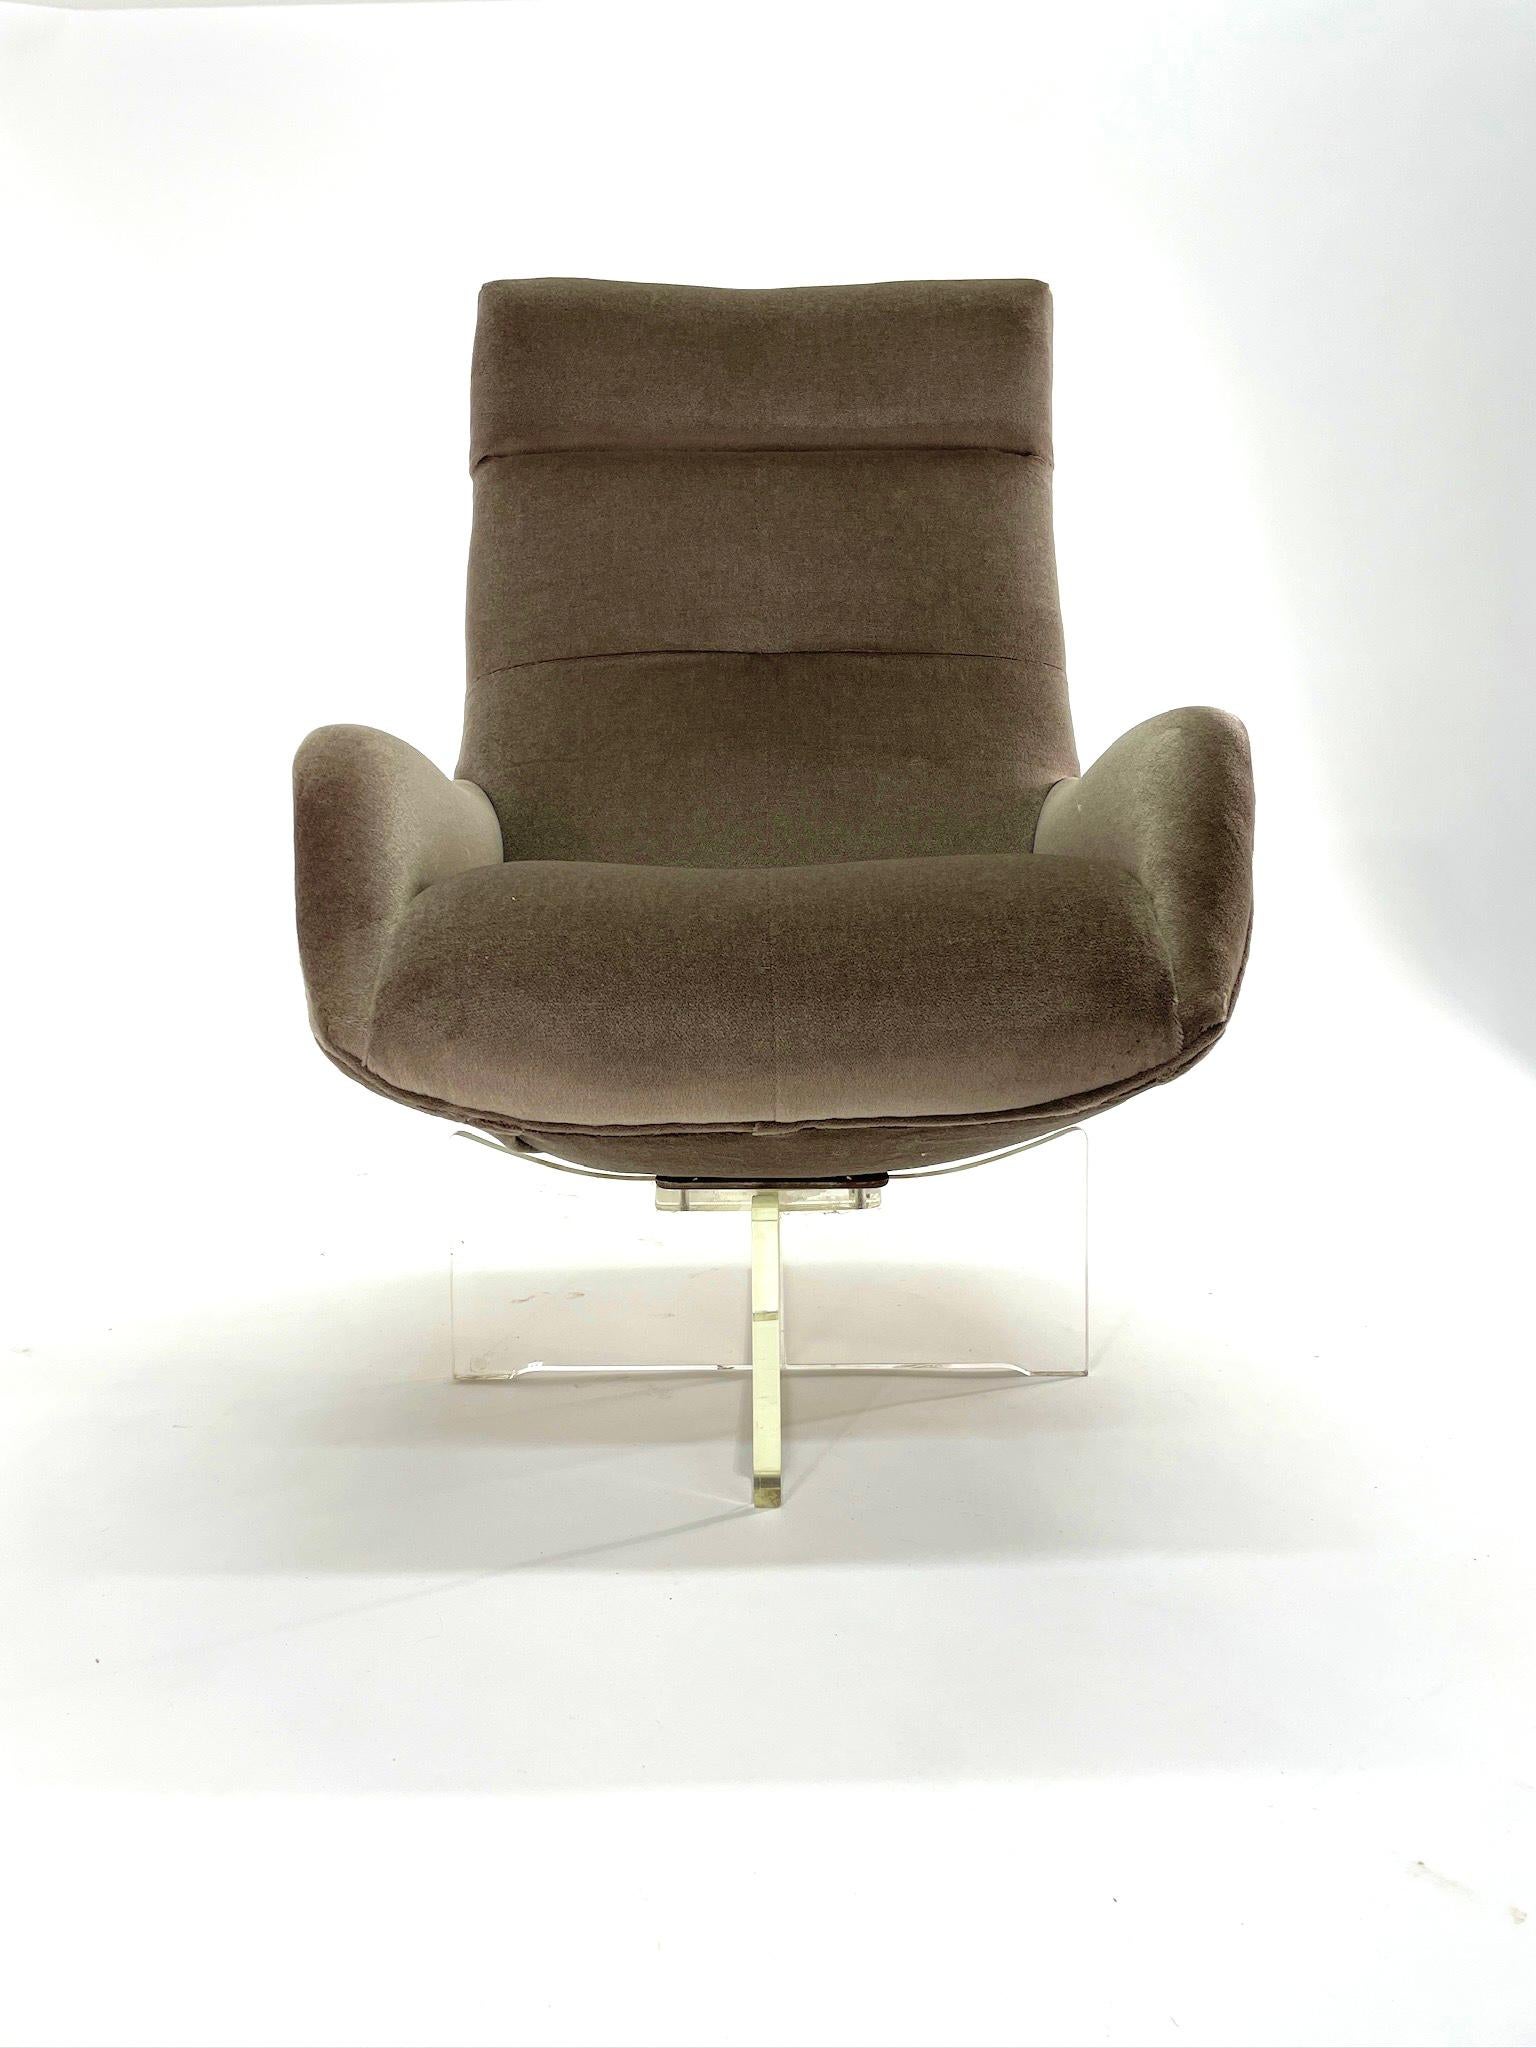 Vladimir Kagan’s Erica Contour High Back Swivel, first introduced in 1967, is a body-supportive design that sits on an X-shaped Lucite base. This incredibly comfortable chair is intended to create the illusion of floating off the ground. The piece